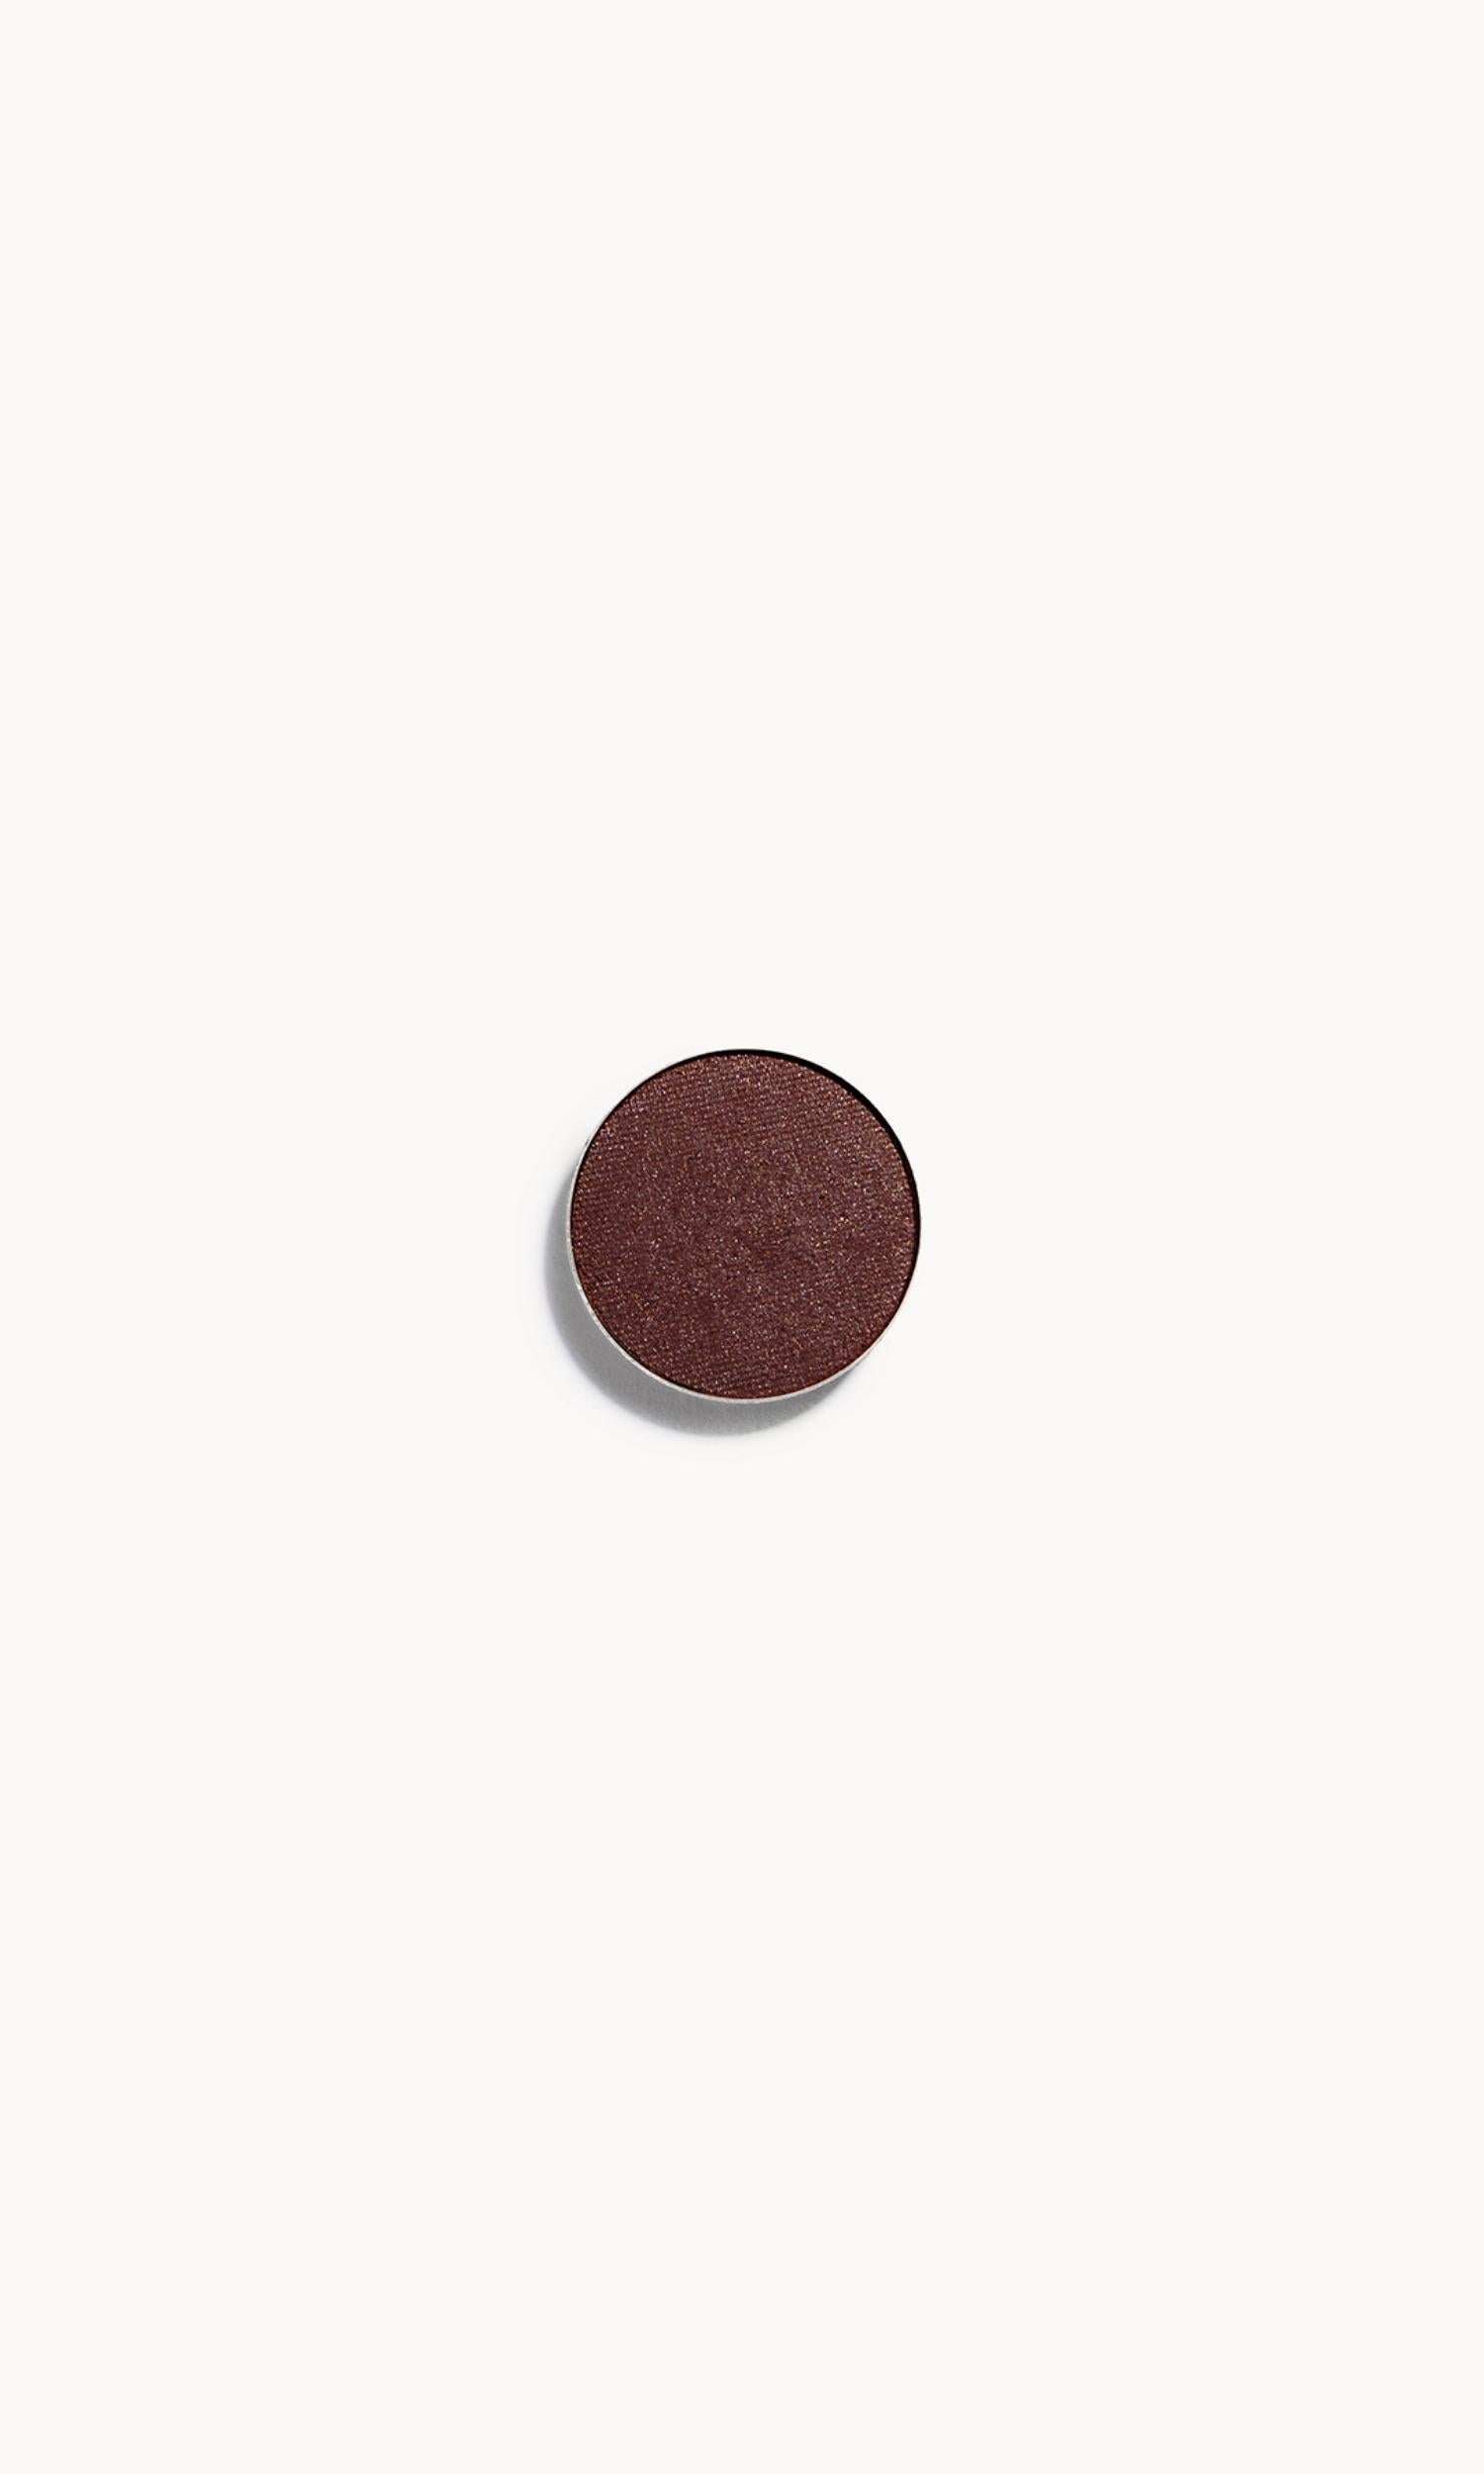 a circle of metallic reddish-brown copper eye shadow on a white background